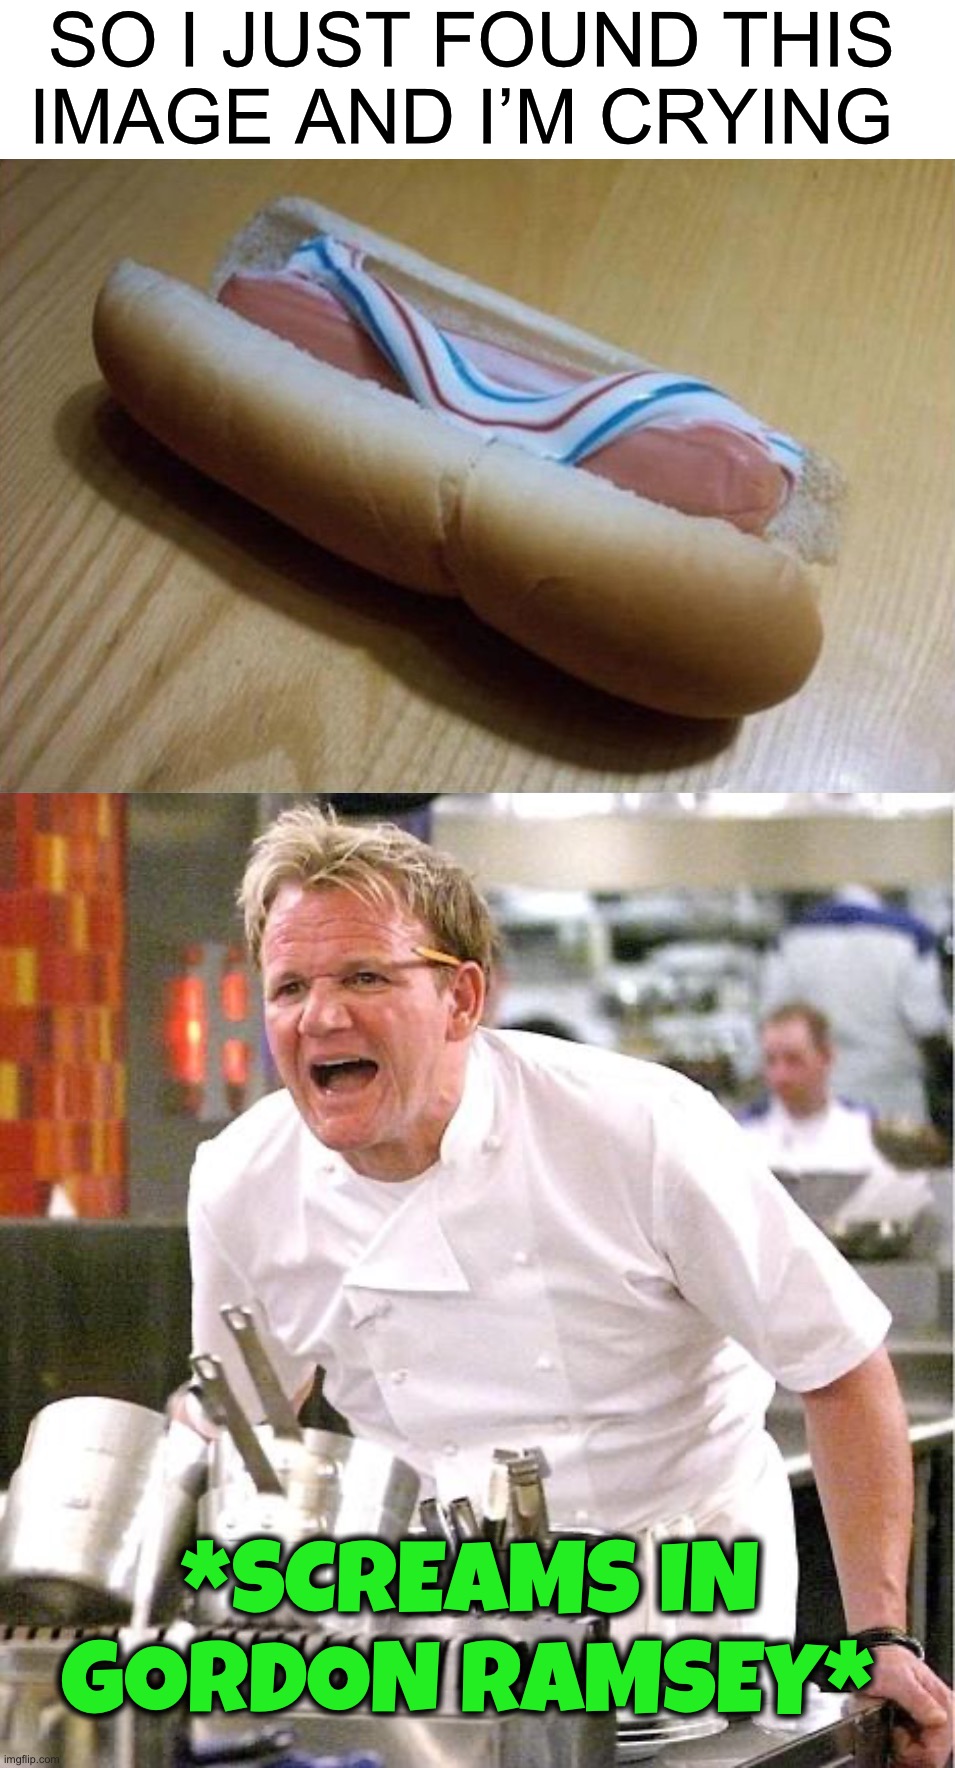 Wtf | SO I JUST FOUND THIS IMAGE AND I’M CRYING; *SCREAMS IN GORDON RAMSEY* | image tagged in memes,chef gordon ramsay,funny,oop,wtf,angry chef gordon ramsay | made w/ Imgflip meme maker